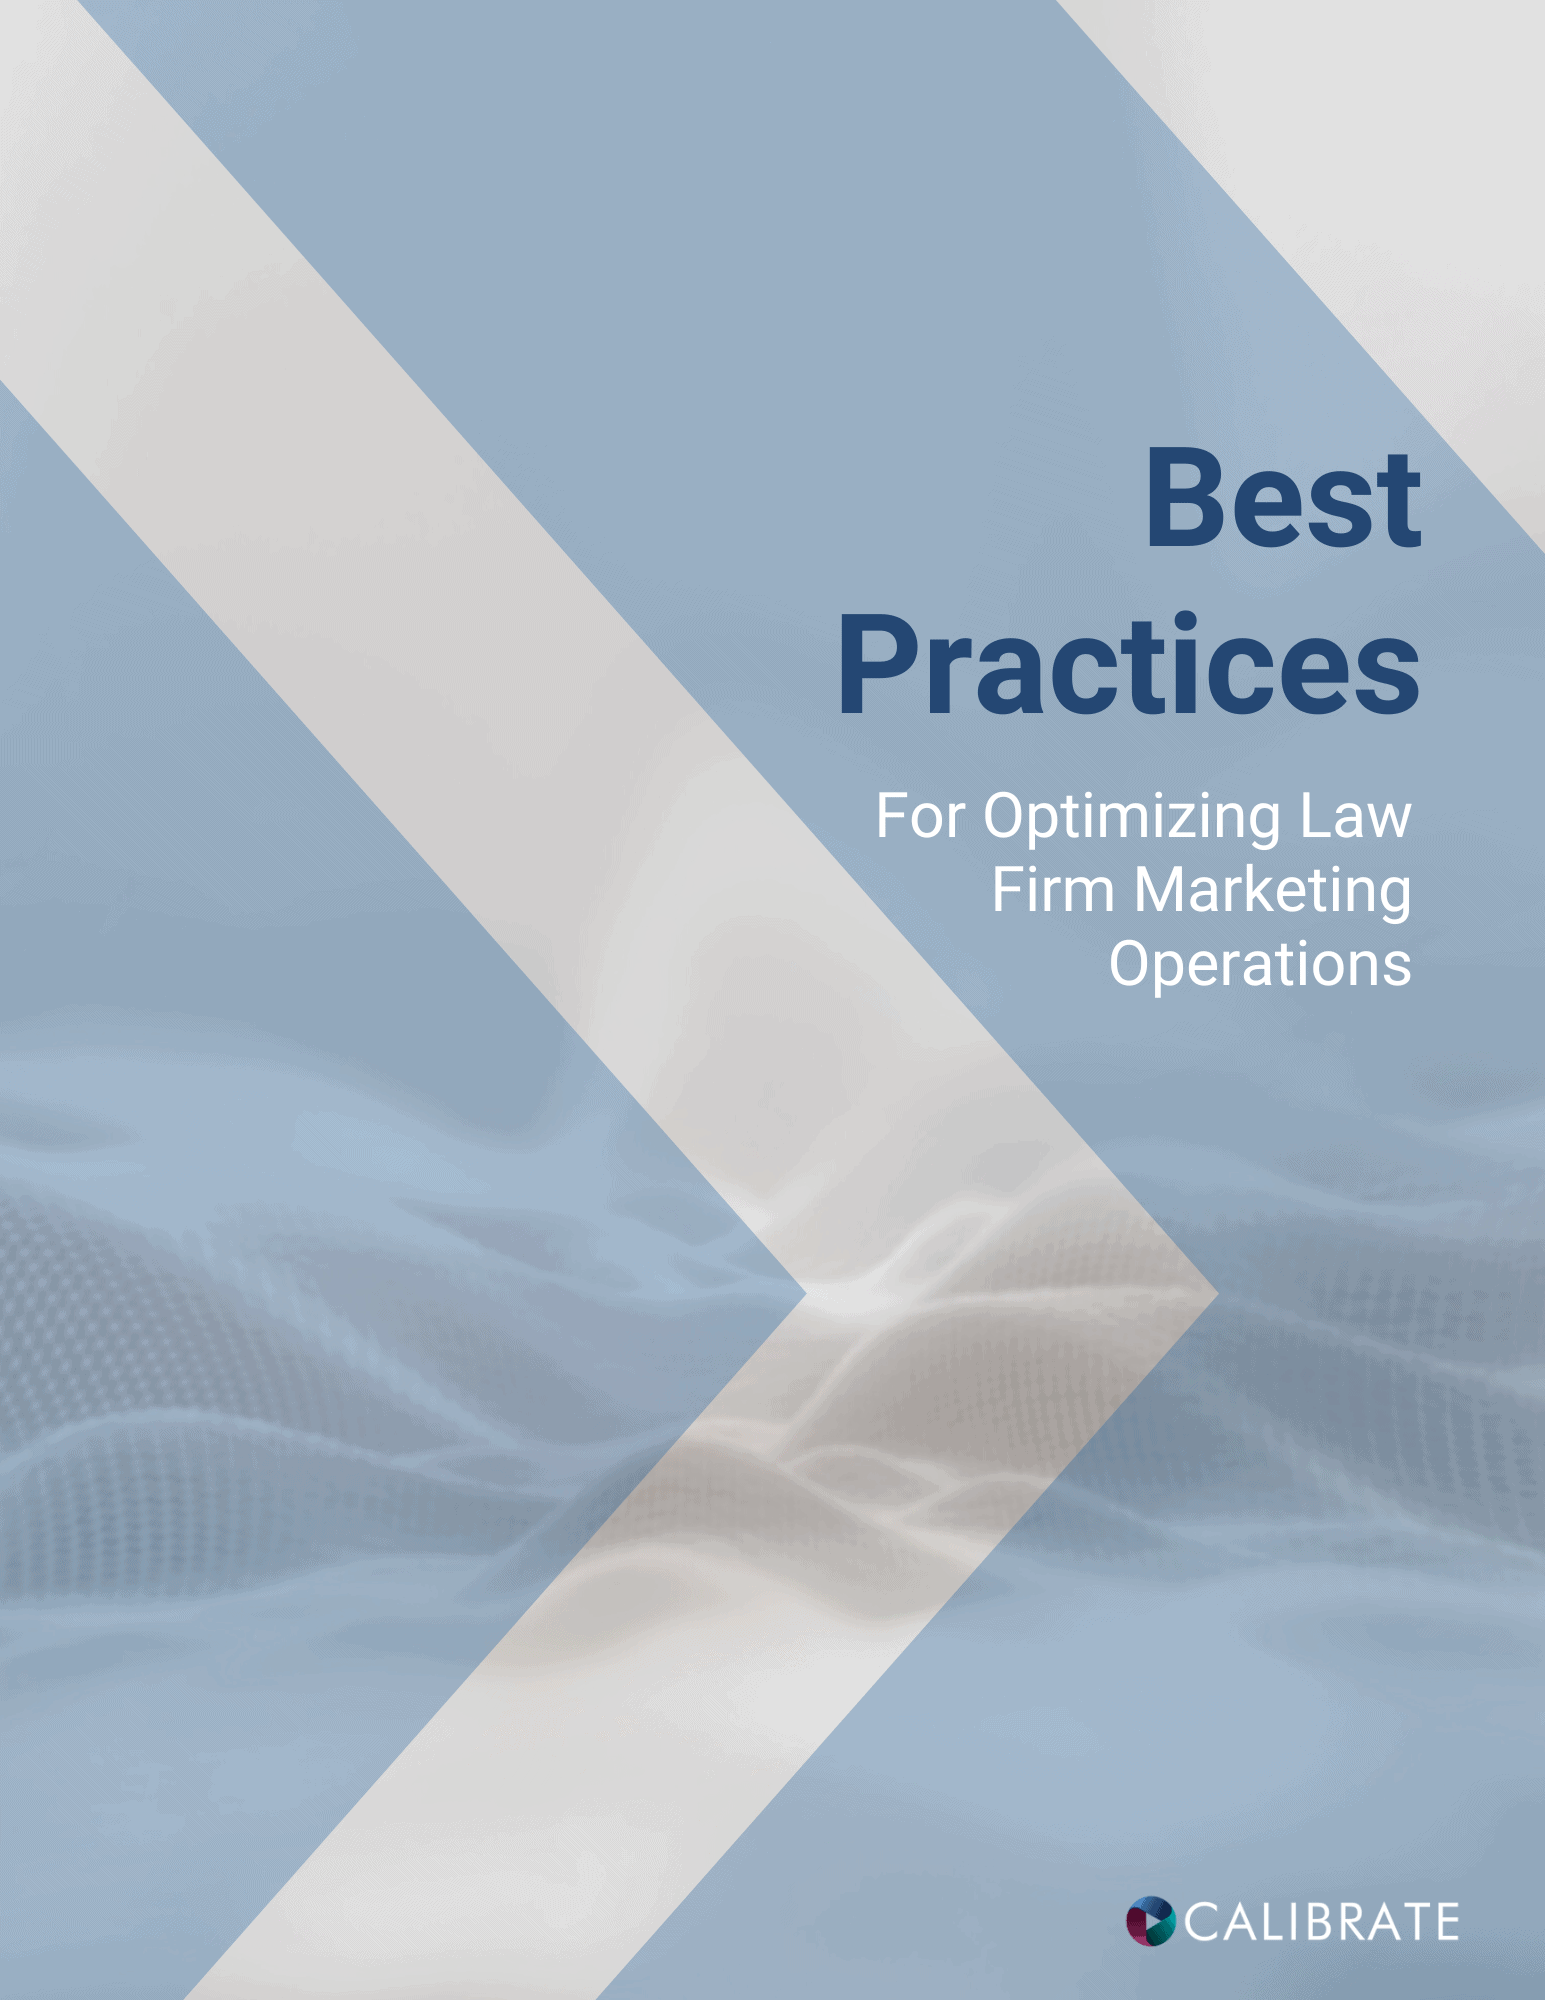 Best Practices for Law Firm Marketing Operations